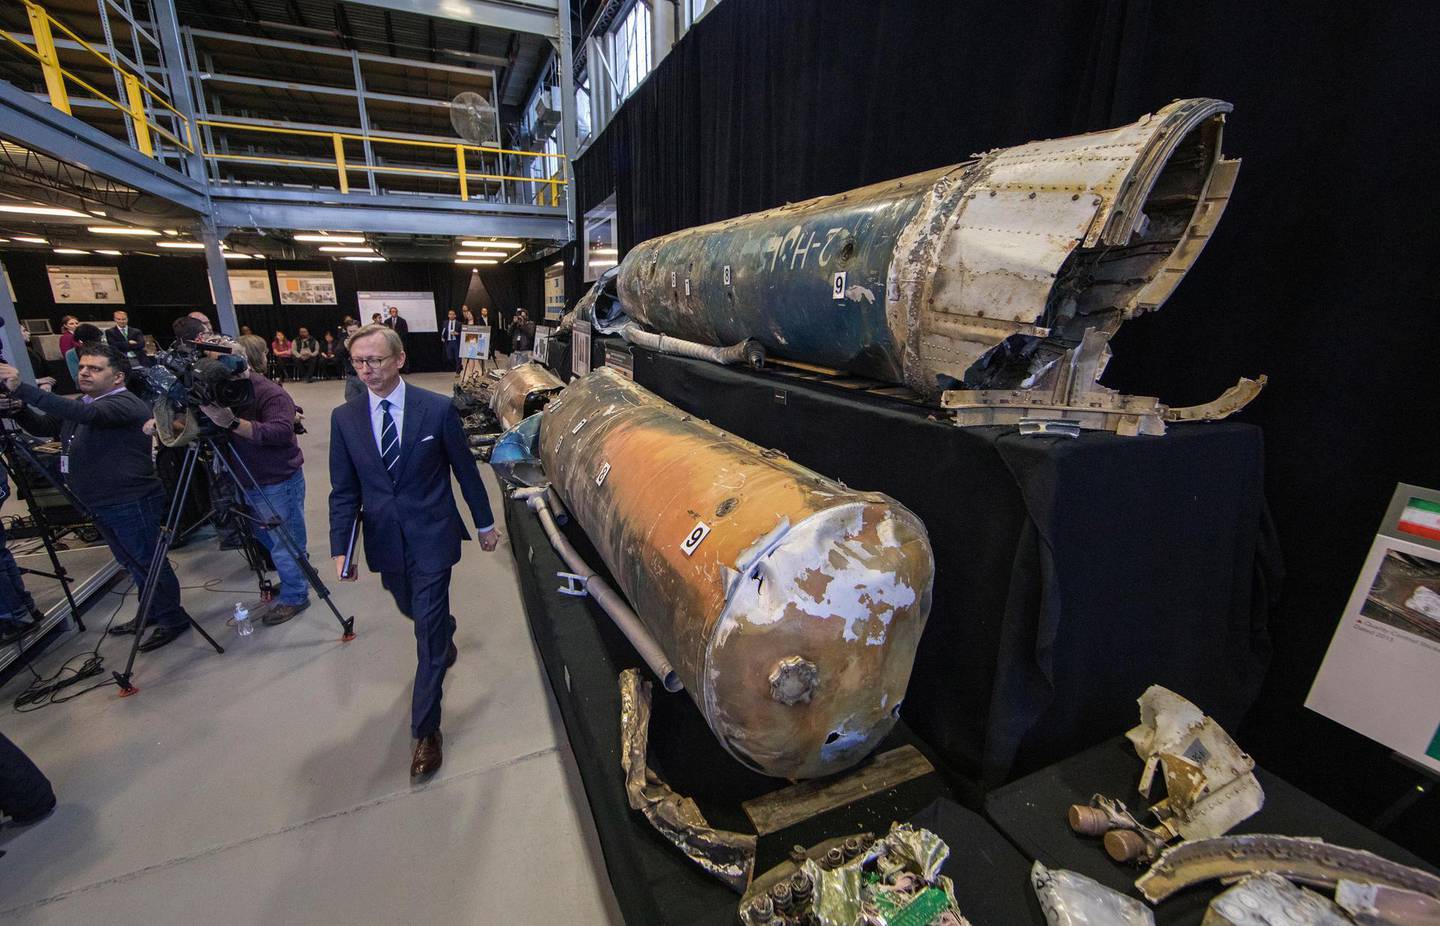 epa07197500 US Special Representative for Iran, Brian Hook (C), arrives for an 'Iranian Materiel Display' press conference in a hangar at Joint Base Anacostia-Bolling in Washington, DC, USA, 29 November 2018. Hook is walking past what are said to be recovered Iranian Qiam short range ballistic missiles.  EPA/ERIK S. LESSER